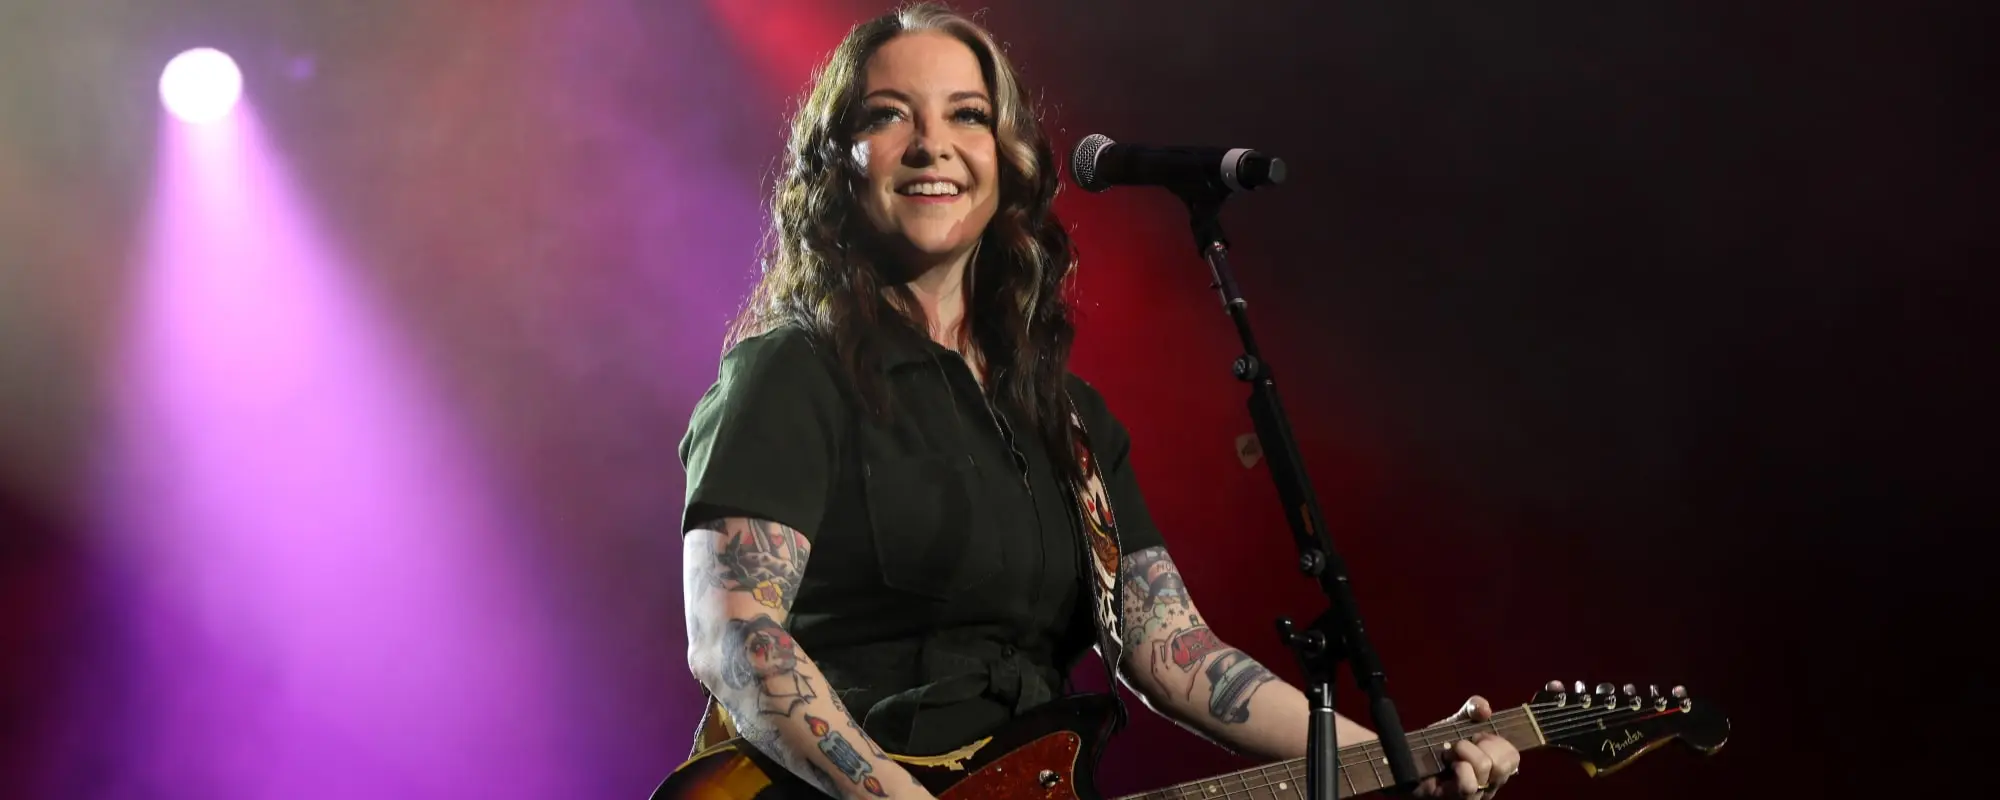 Ashley McBryde, Cody Johnson, Jelly Roll, and More Selected as 2024 CMT Music Awards Video of the Year Finalists